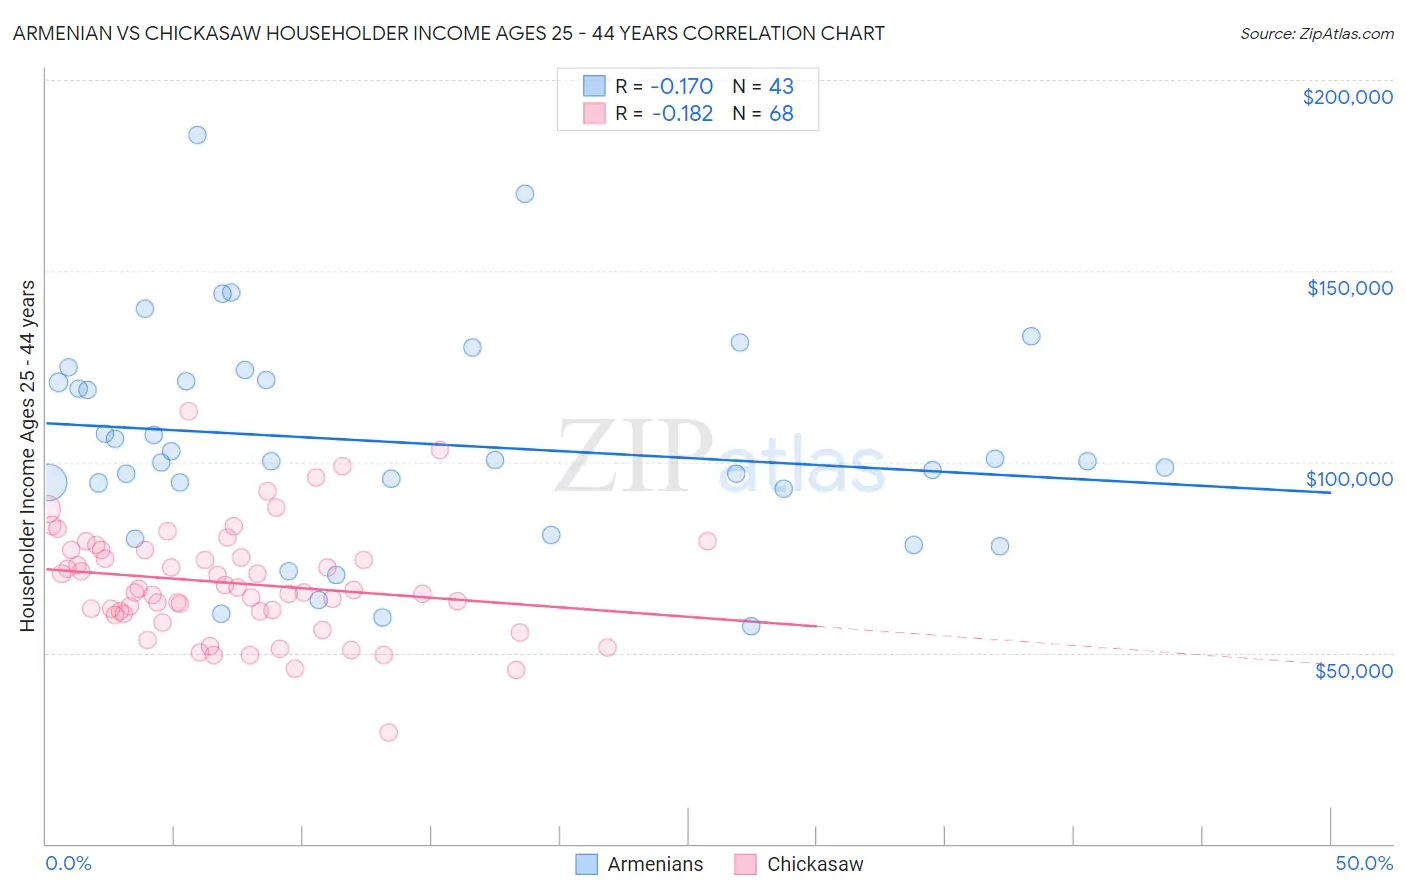 Armenian vs Chickasaw Householder Income Ages 25 - 44 years